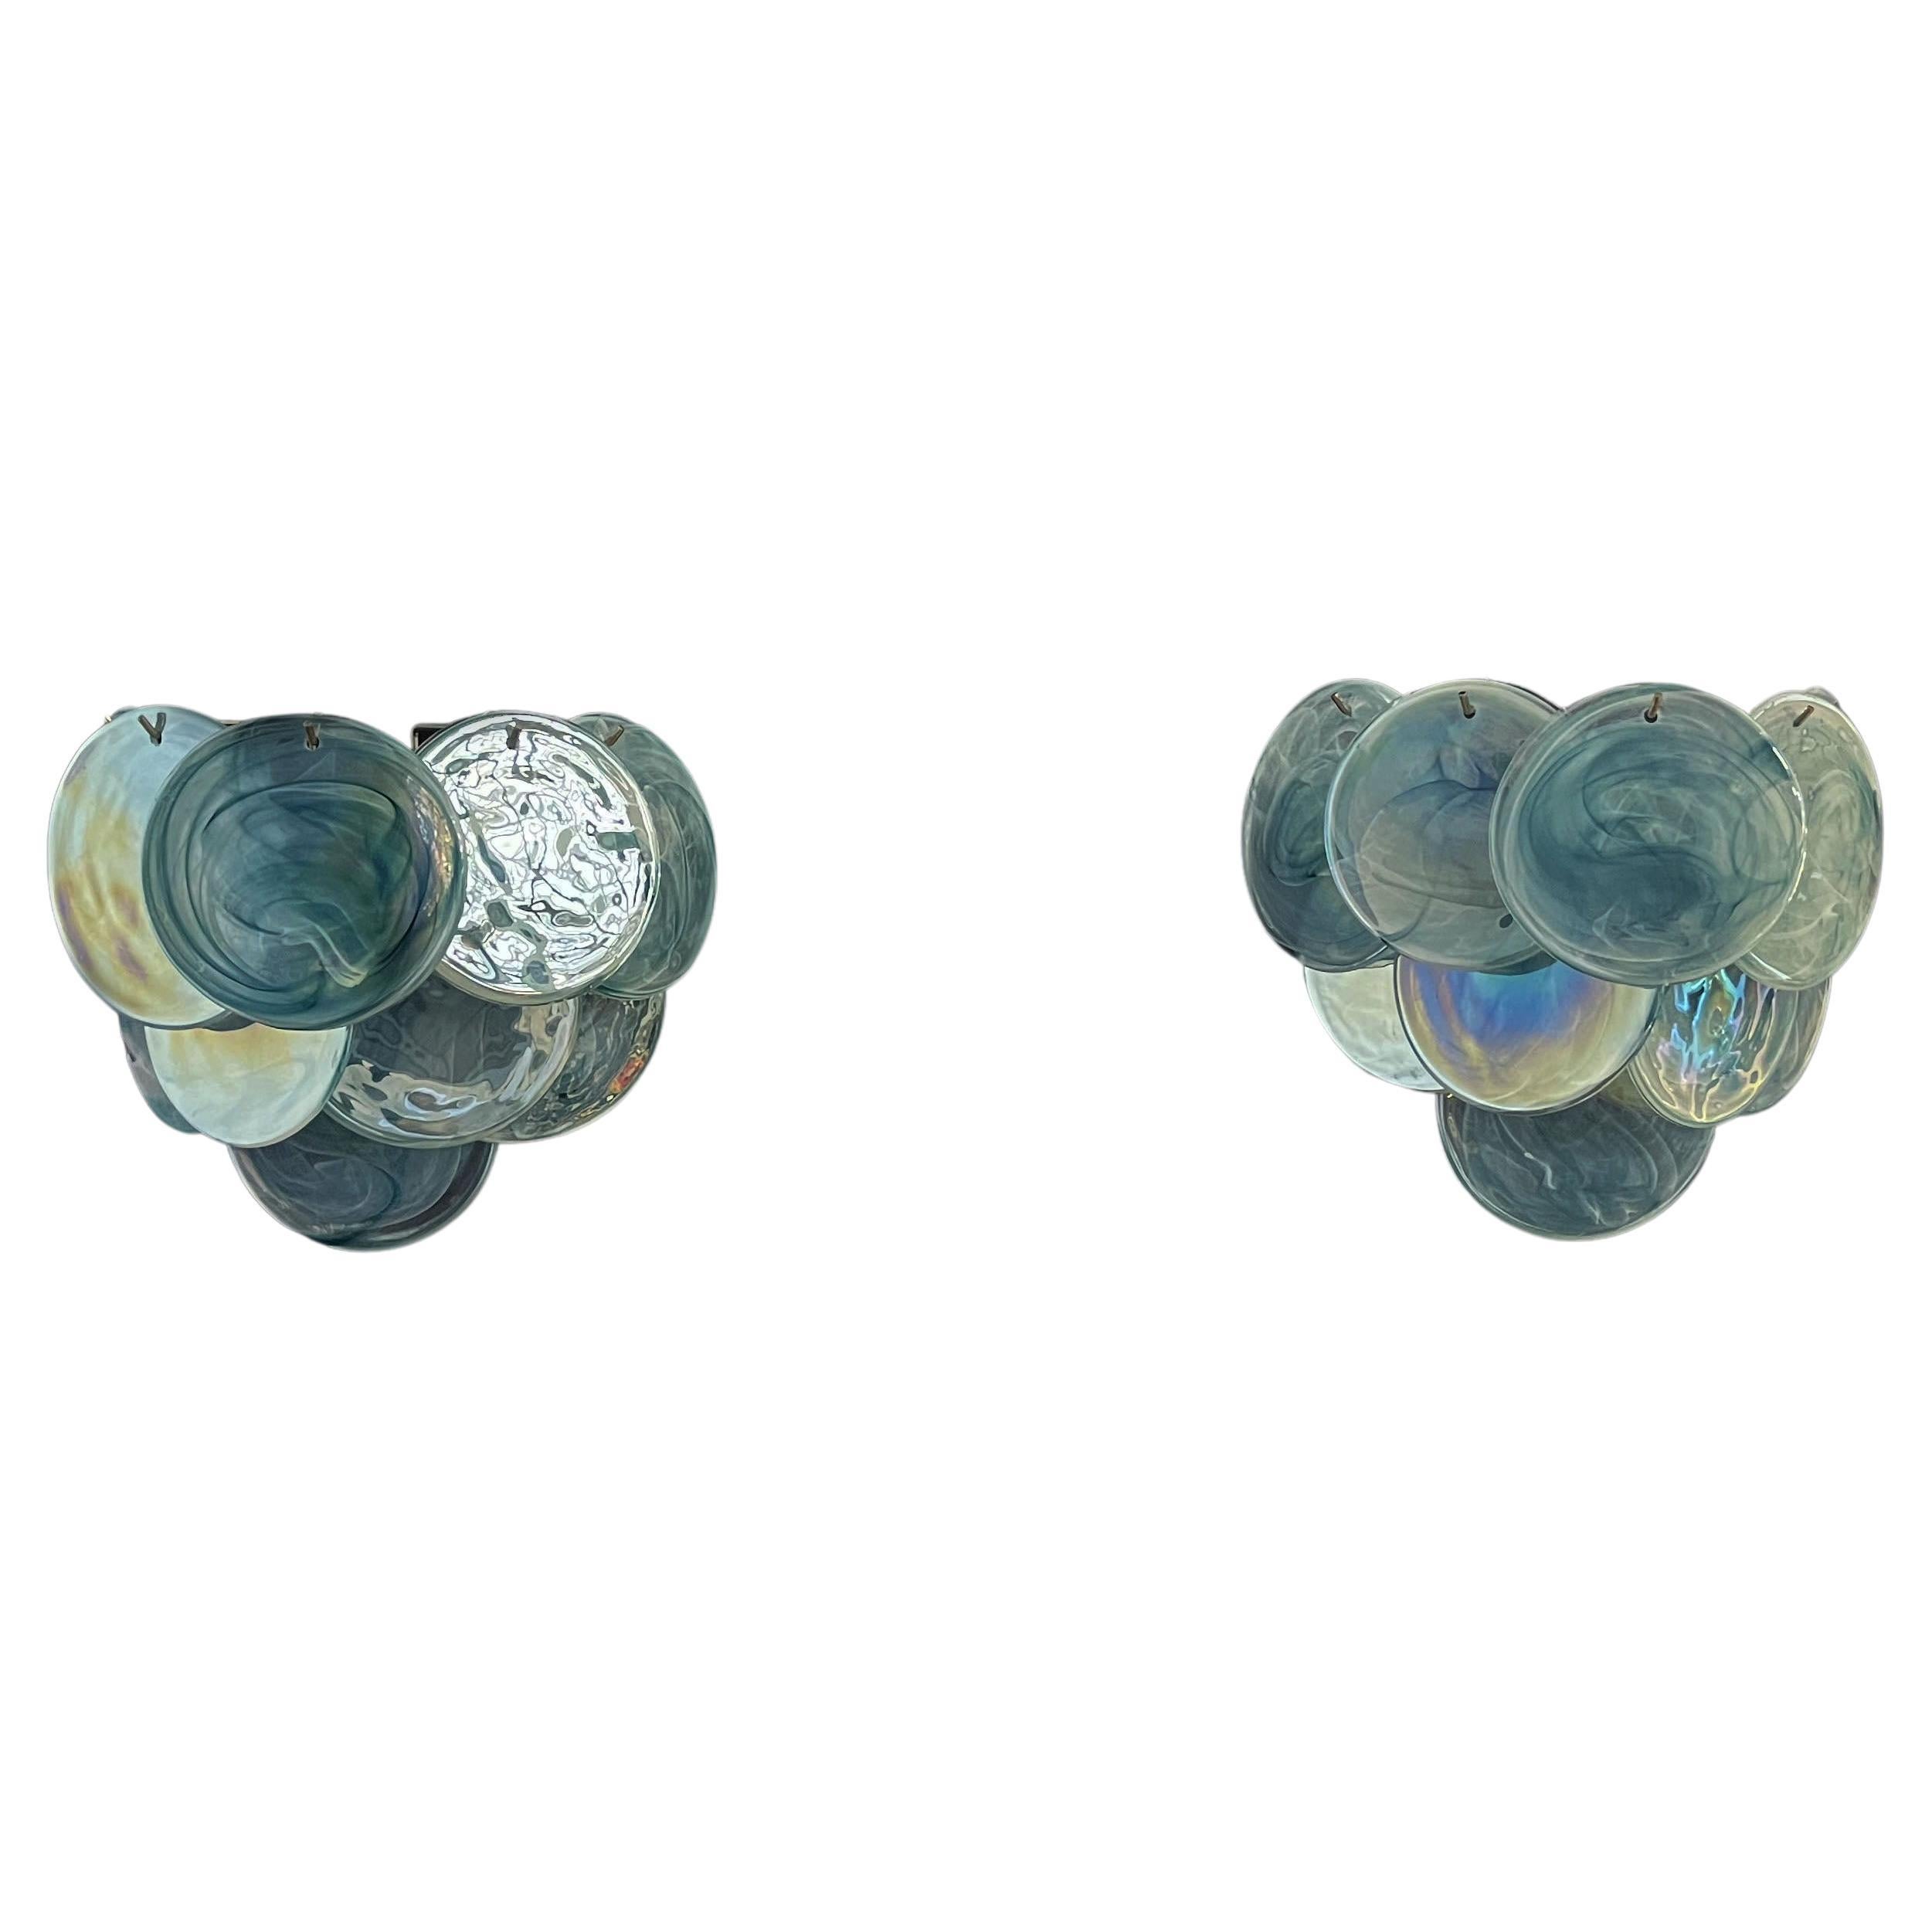 Pair of Glass Wall Sconces, 10 Iridescent Alabaster Blue Discs